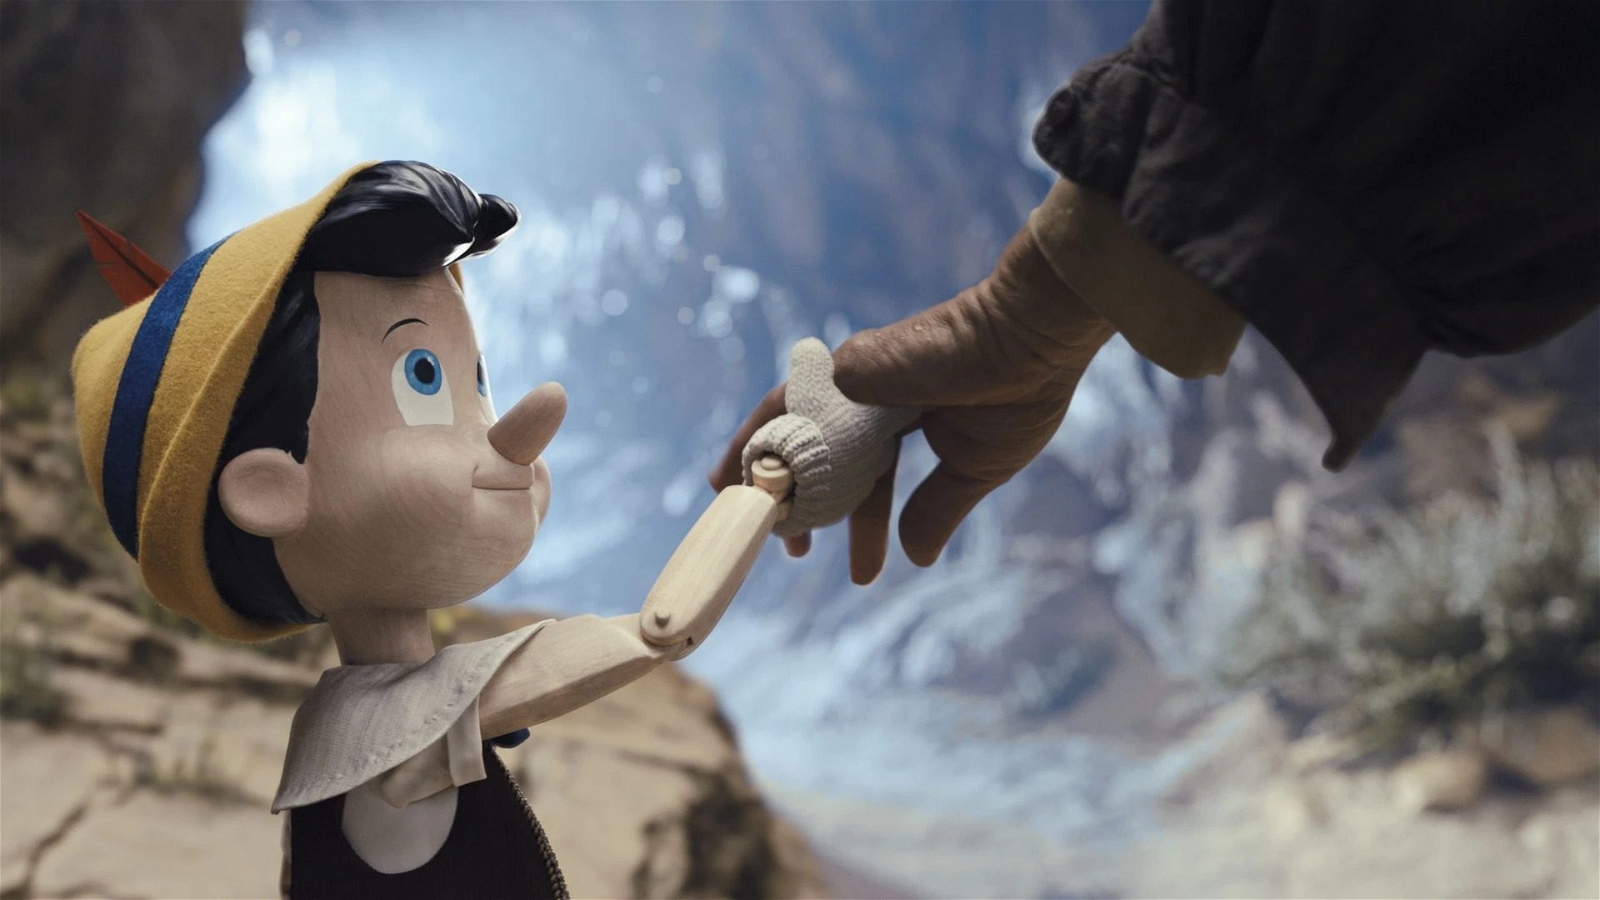 Pinocchio as he appears in the 2022 film